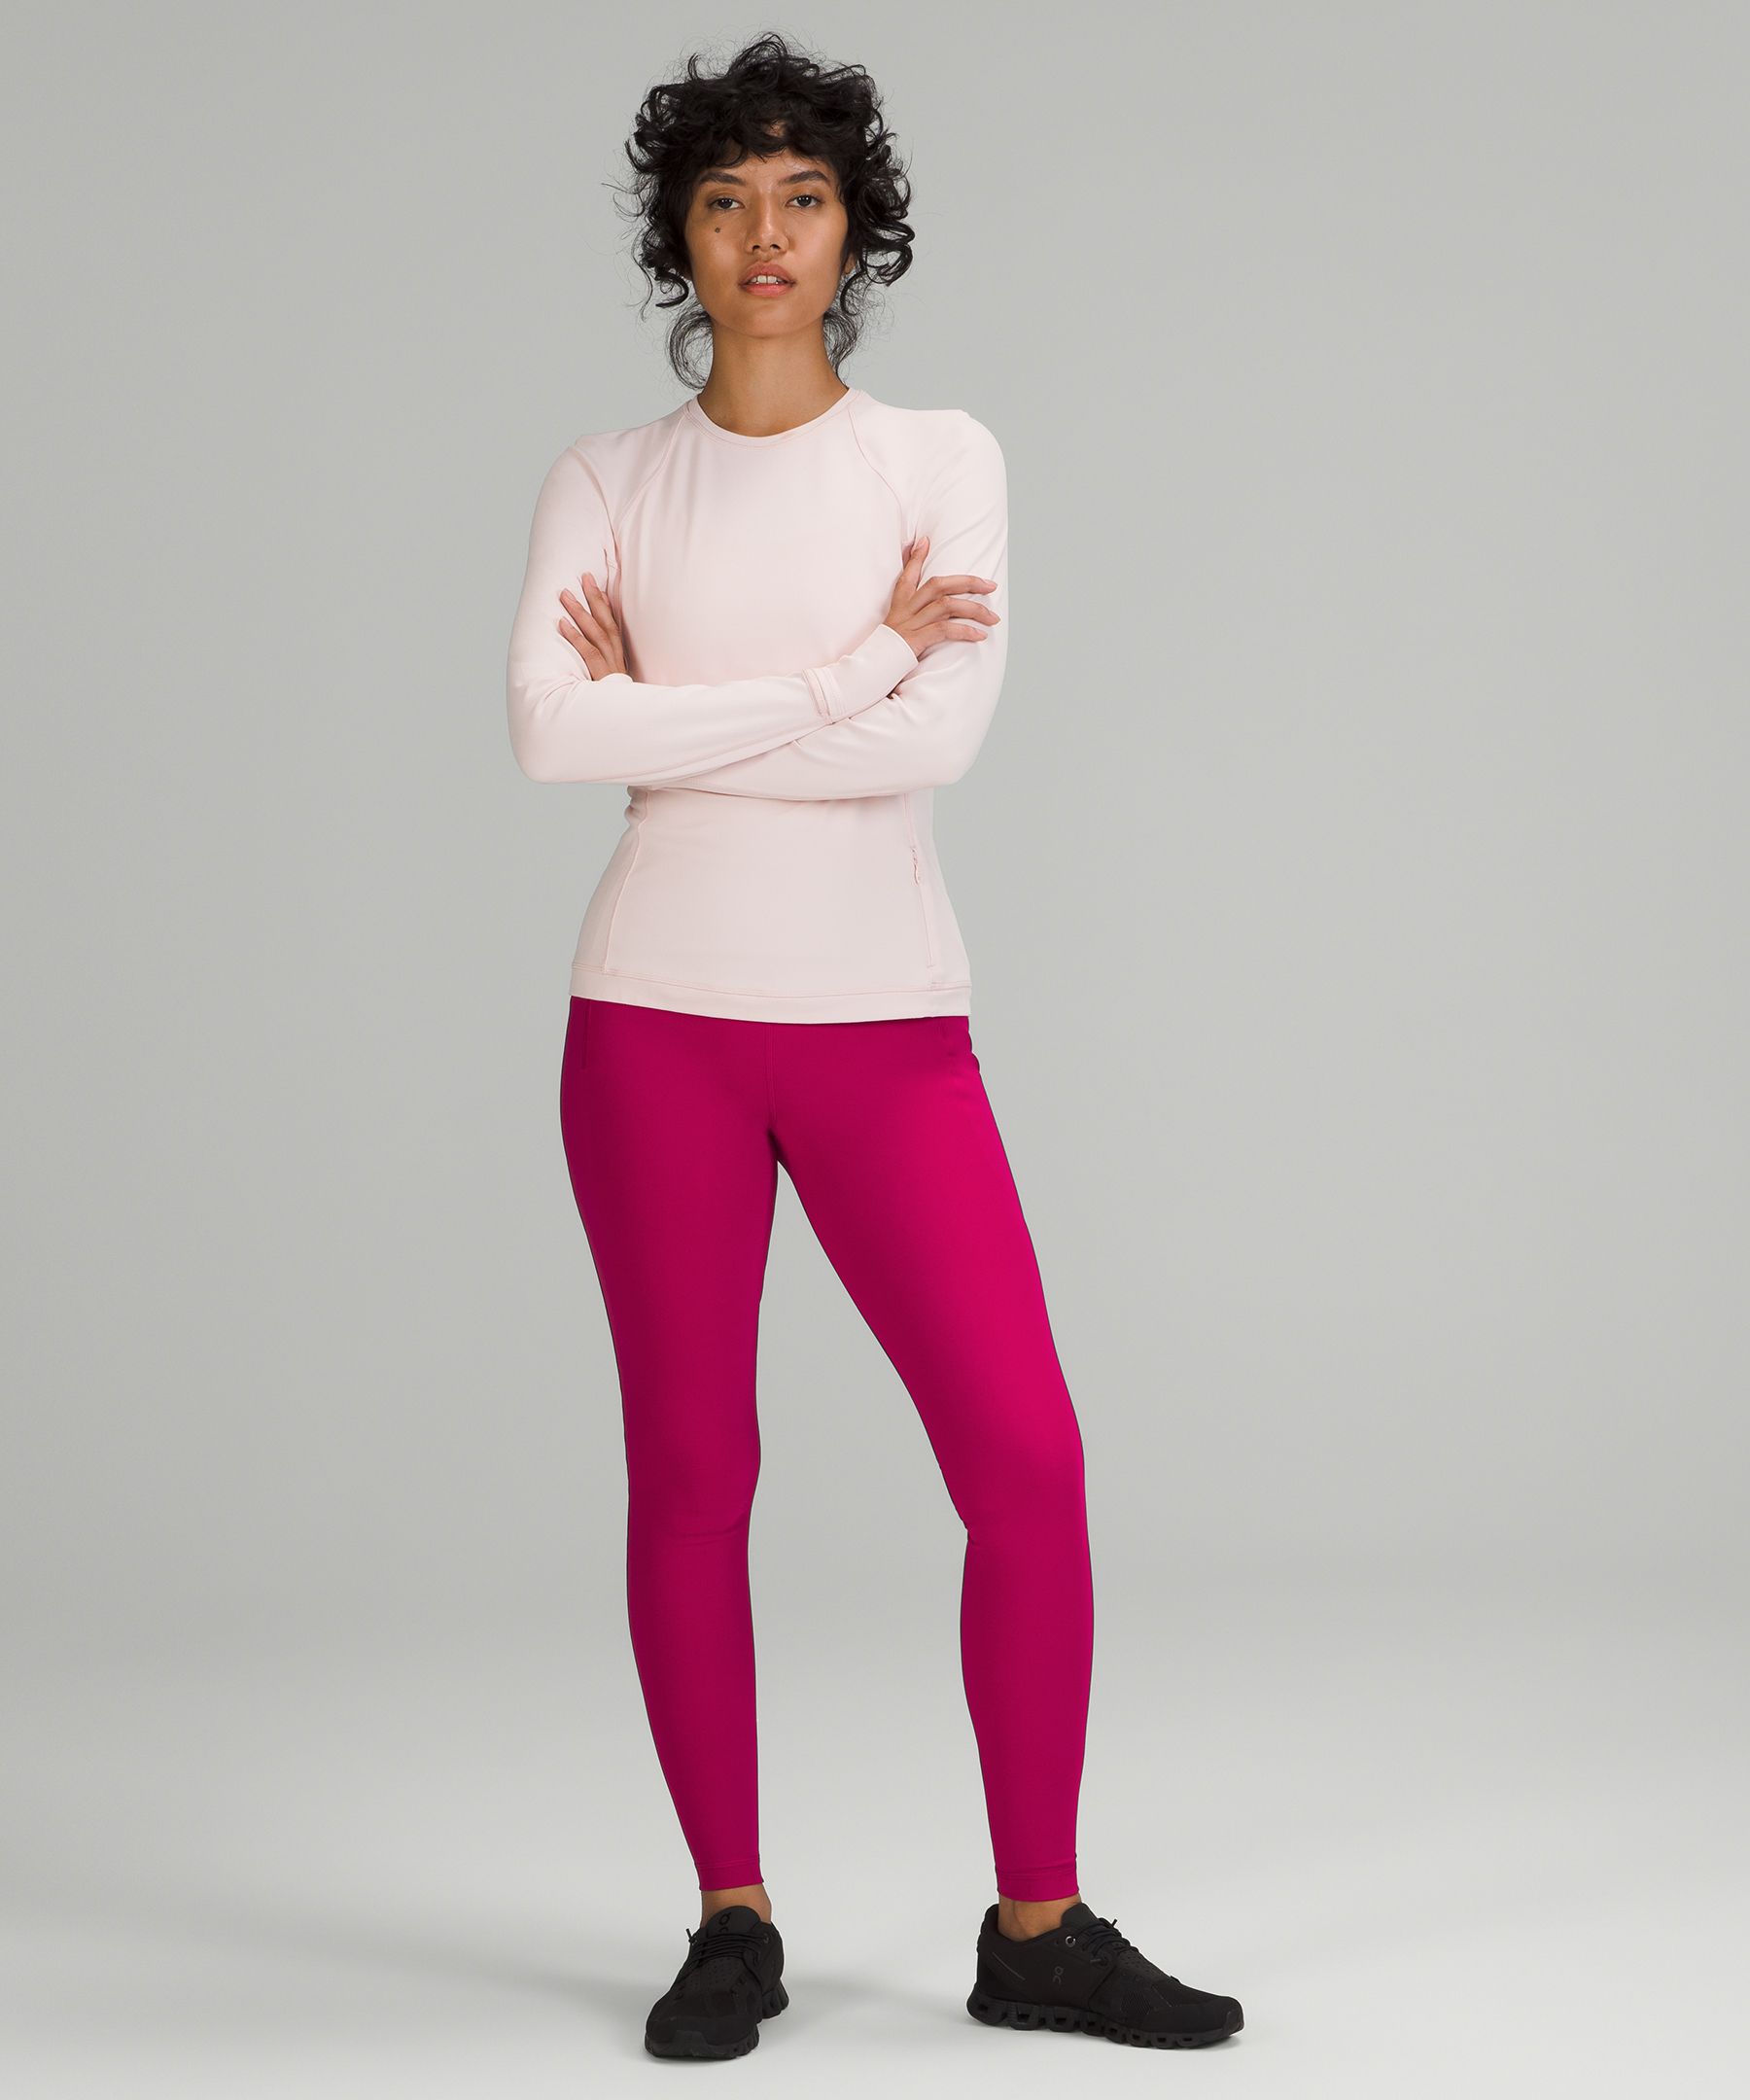 Lululemon Zone In Tight Raspberry compression 7/8 tight Size 2